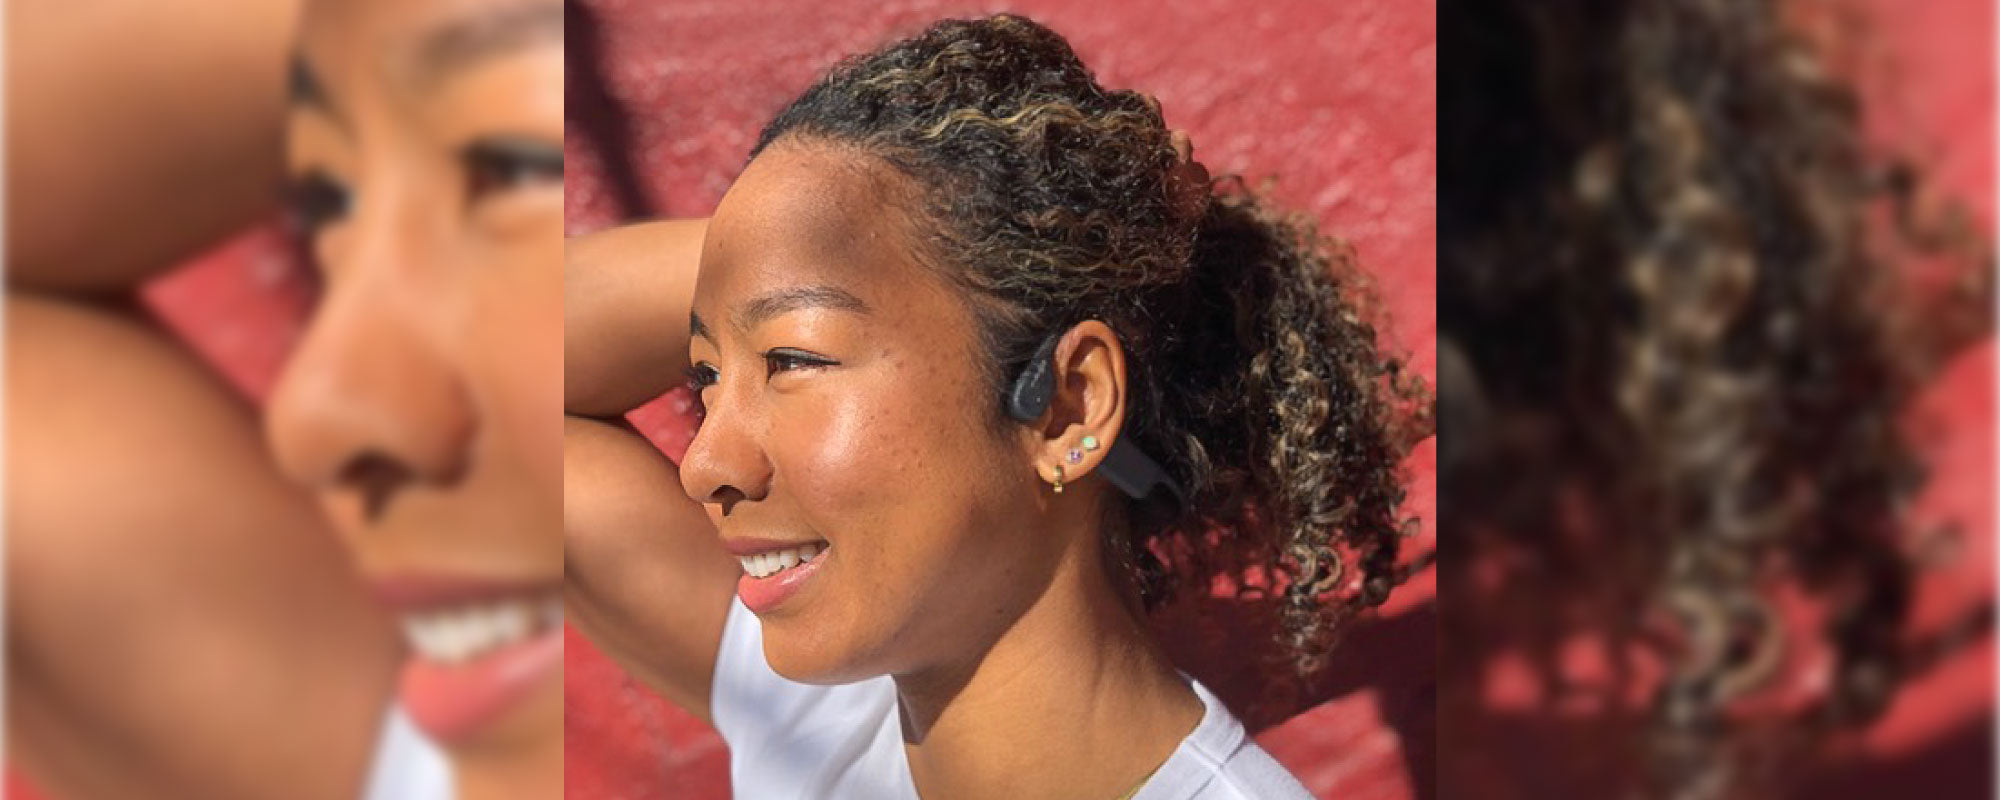 Olympic swimmer Lia Neal wearing AfterShokz Xtrainerz swimming headphones